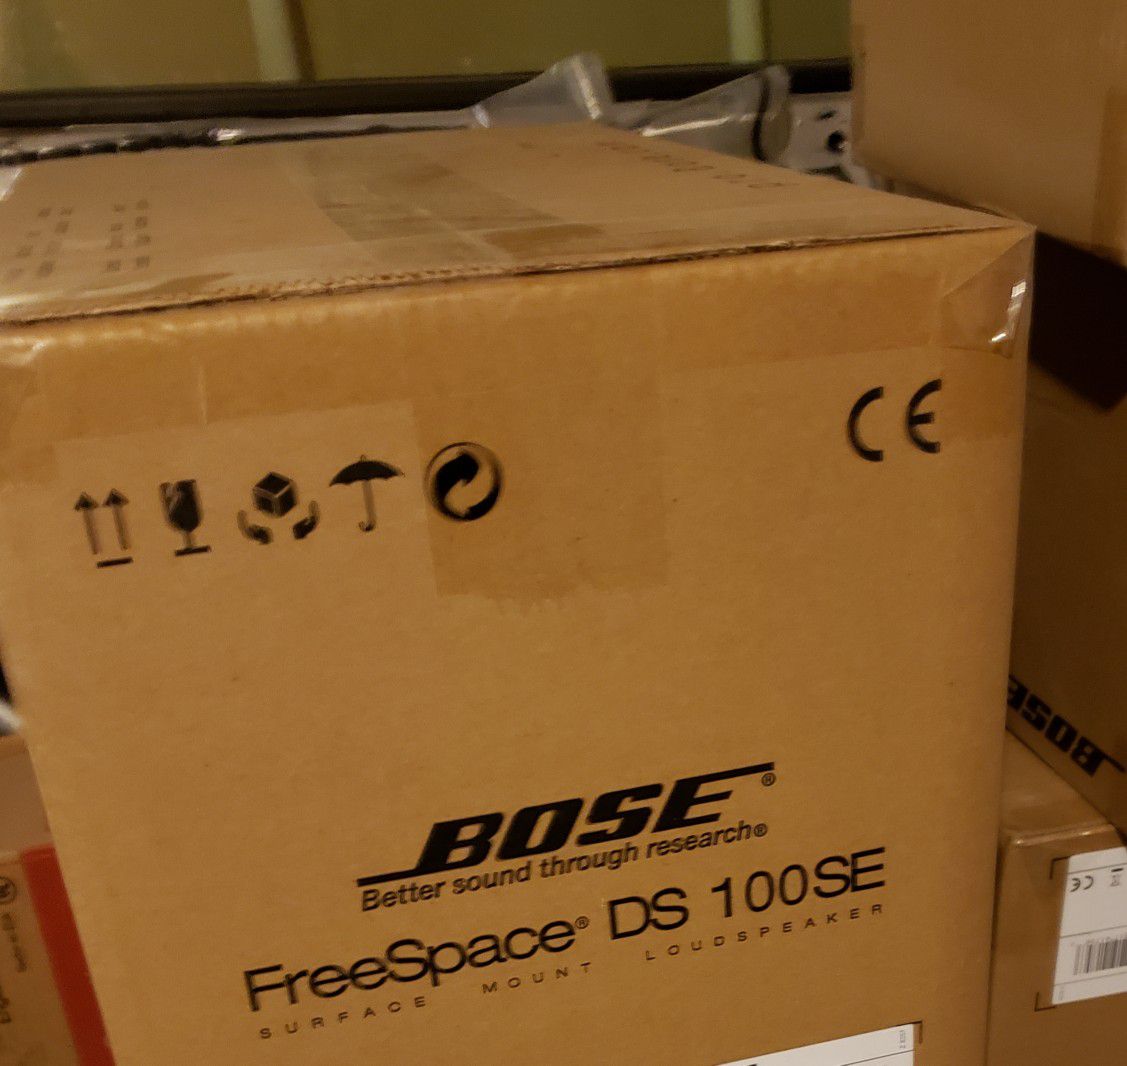 Bose Wall mounted speakers